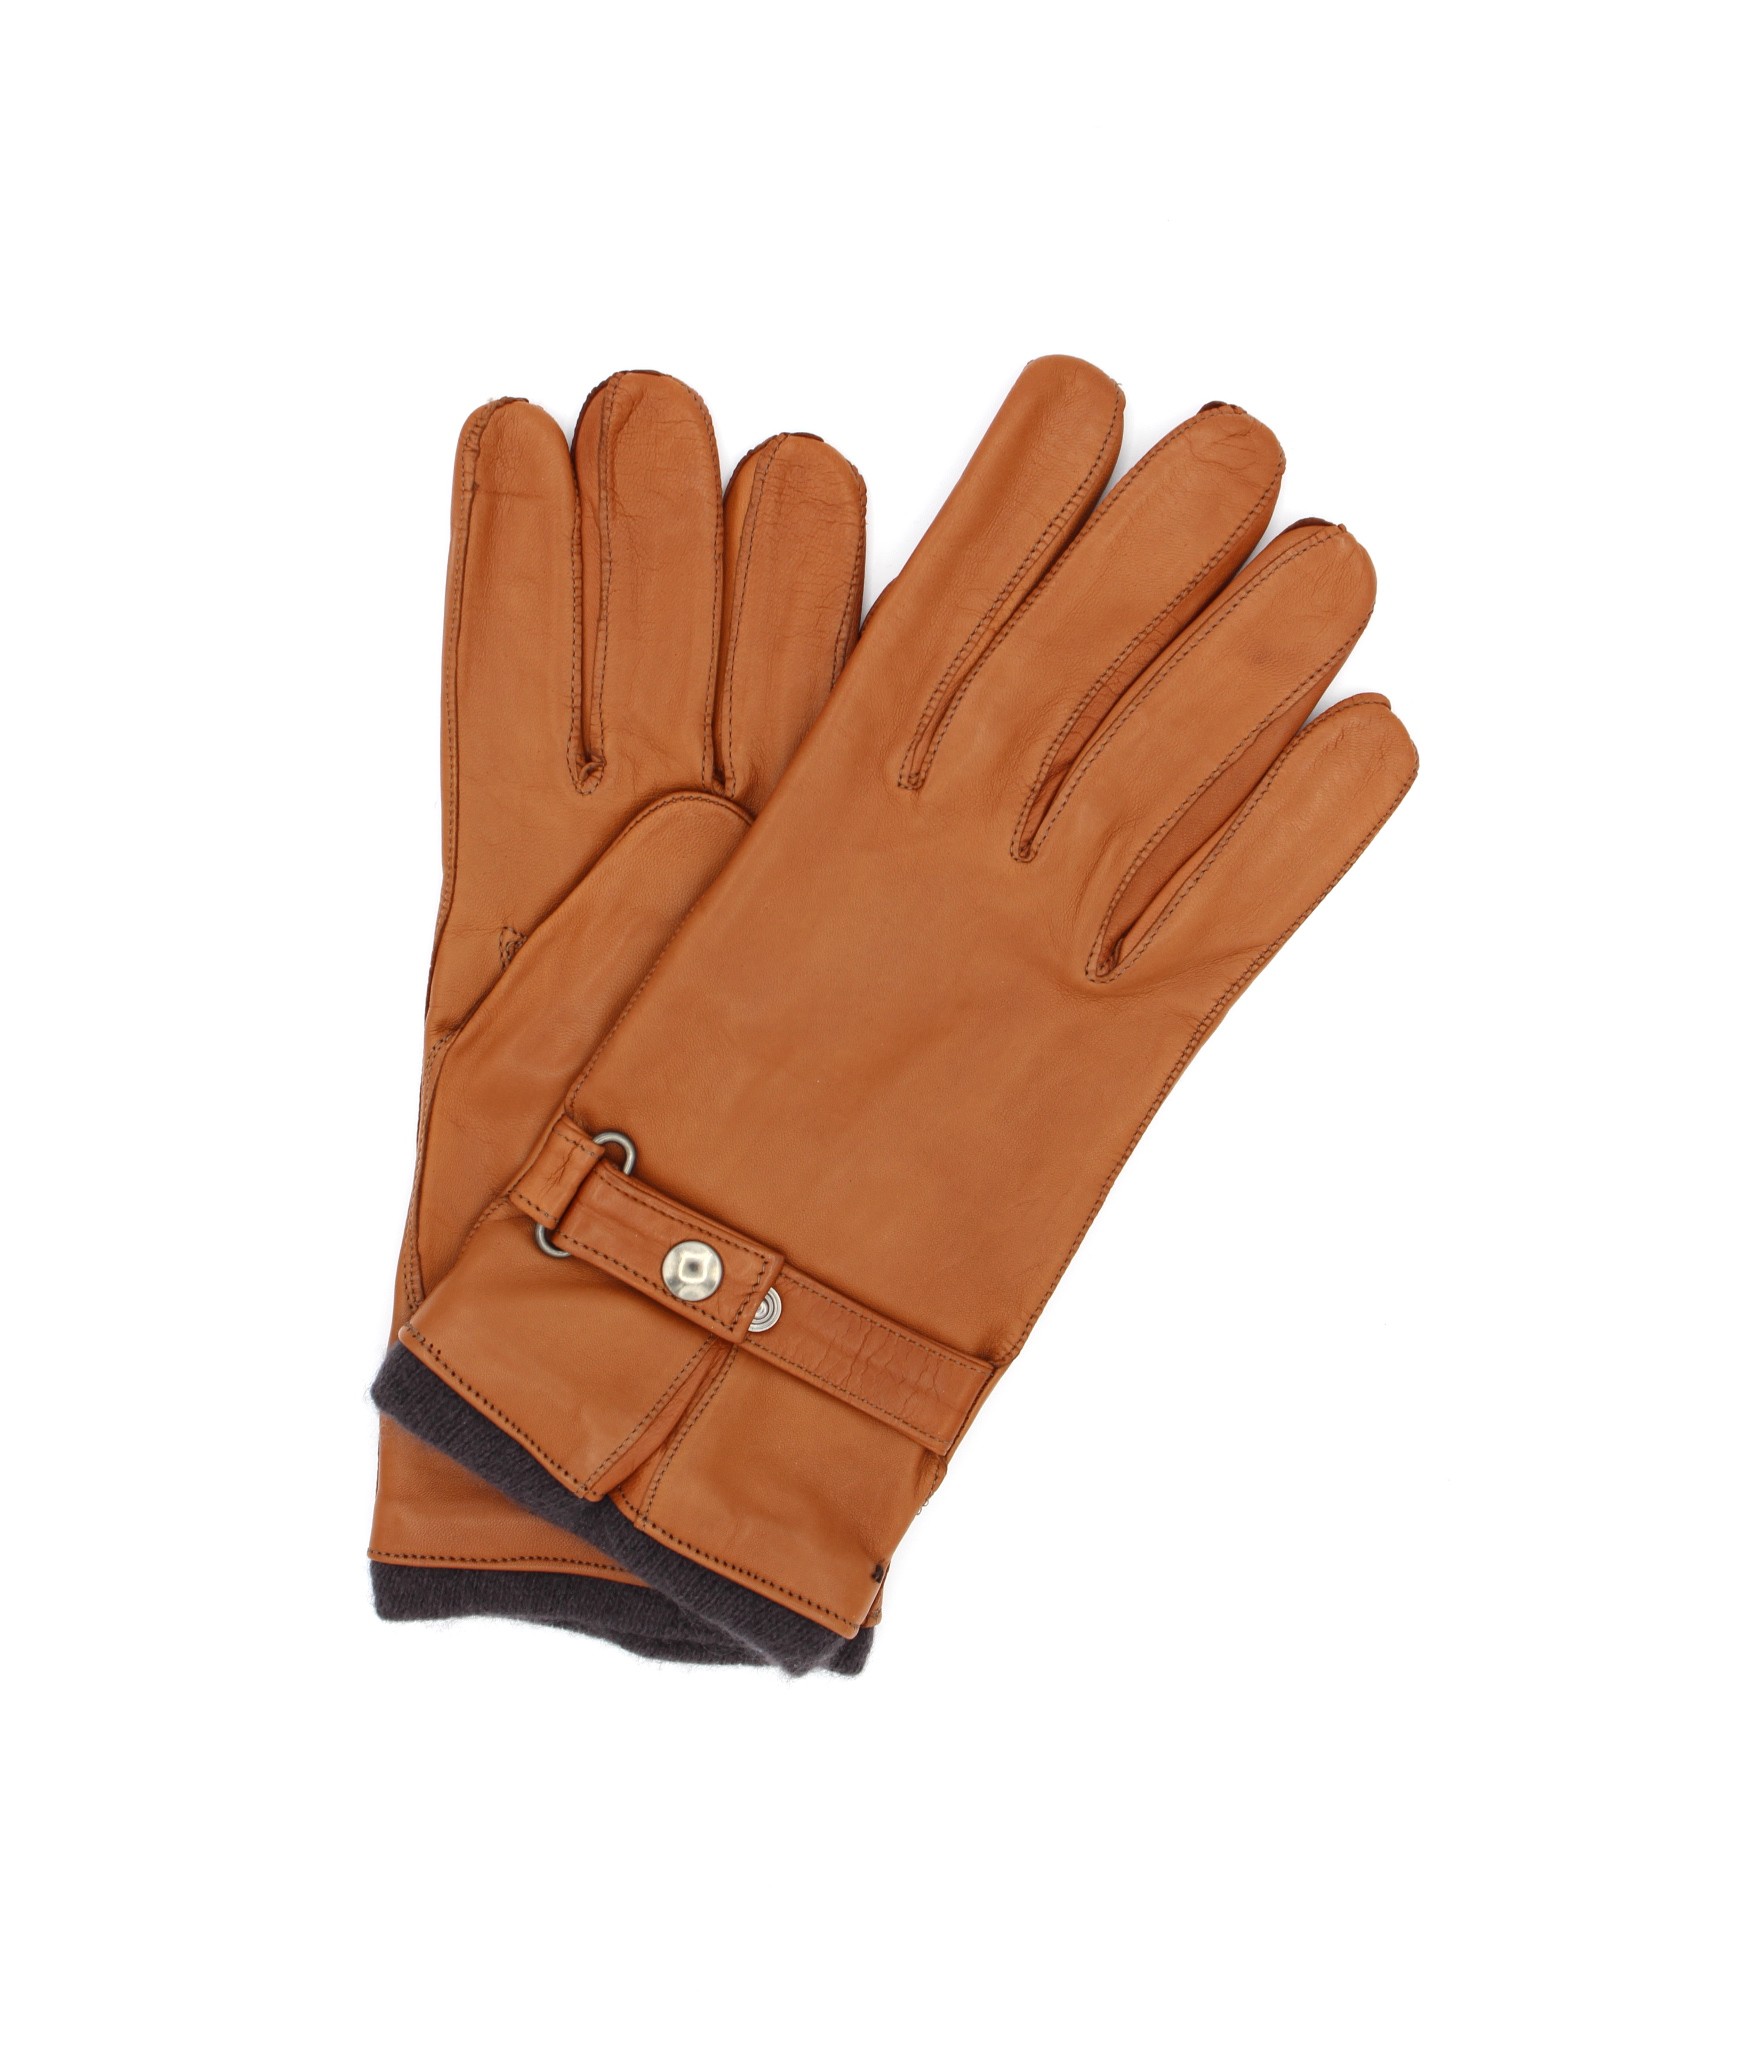 Uomo Fashion Nappa leather gloves cashmere lined with strap Tan